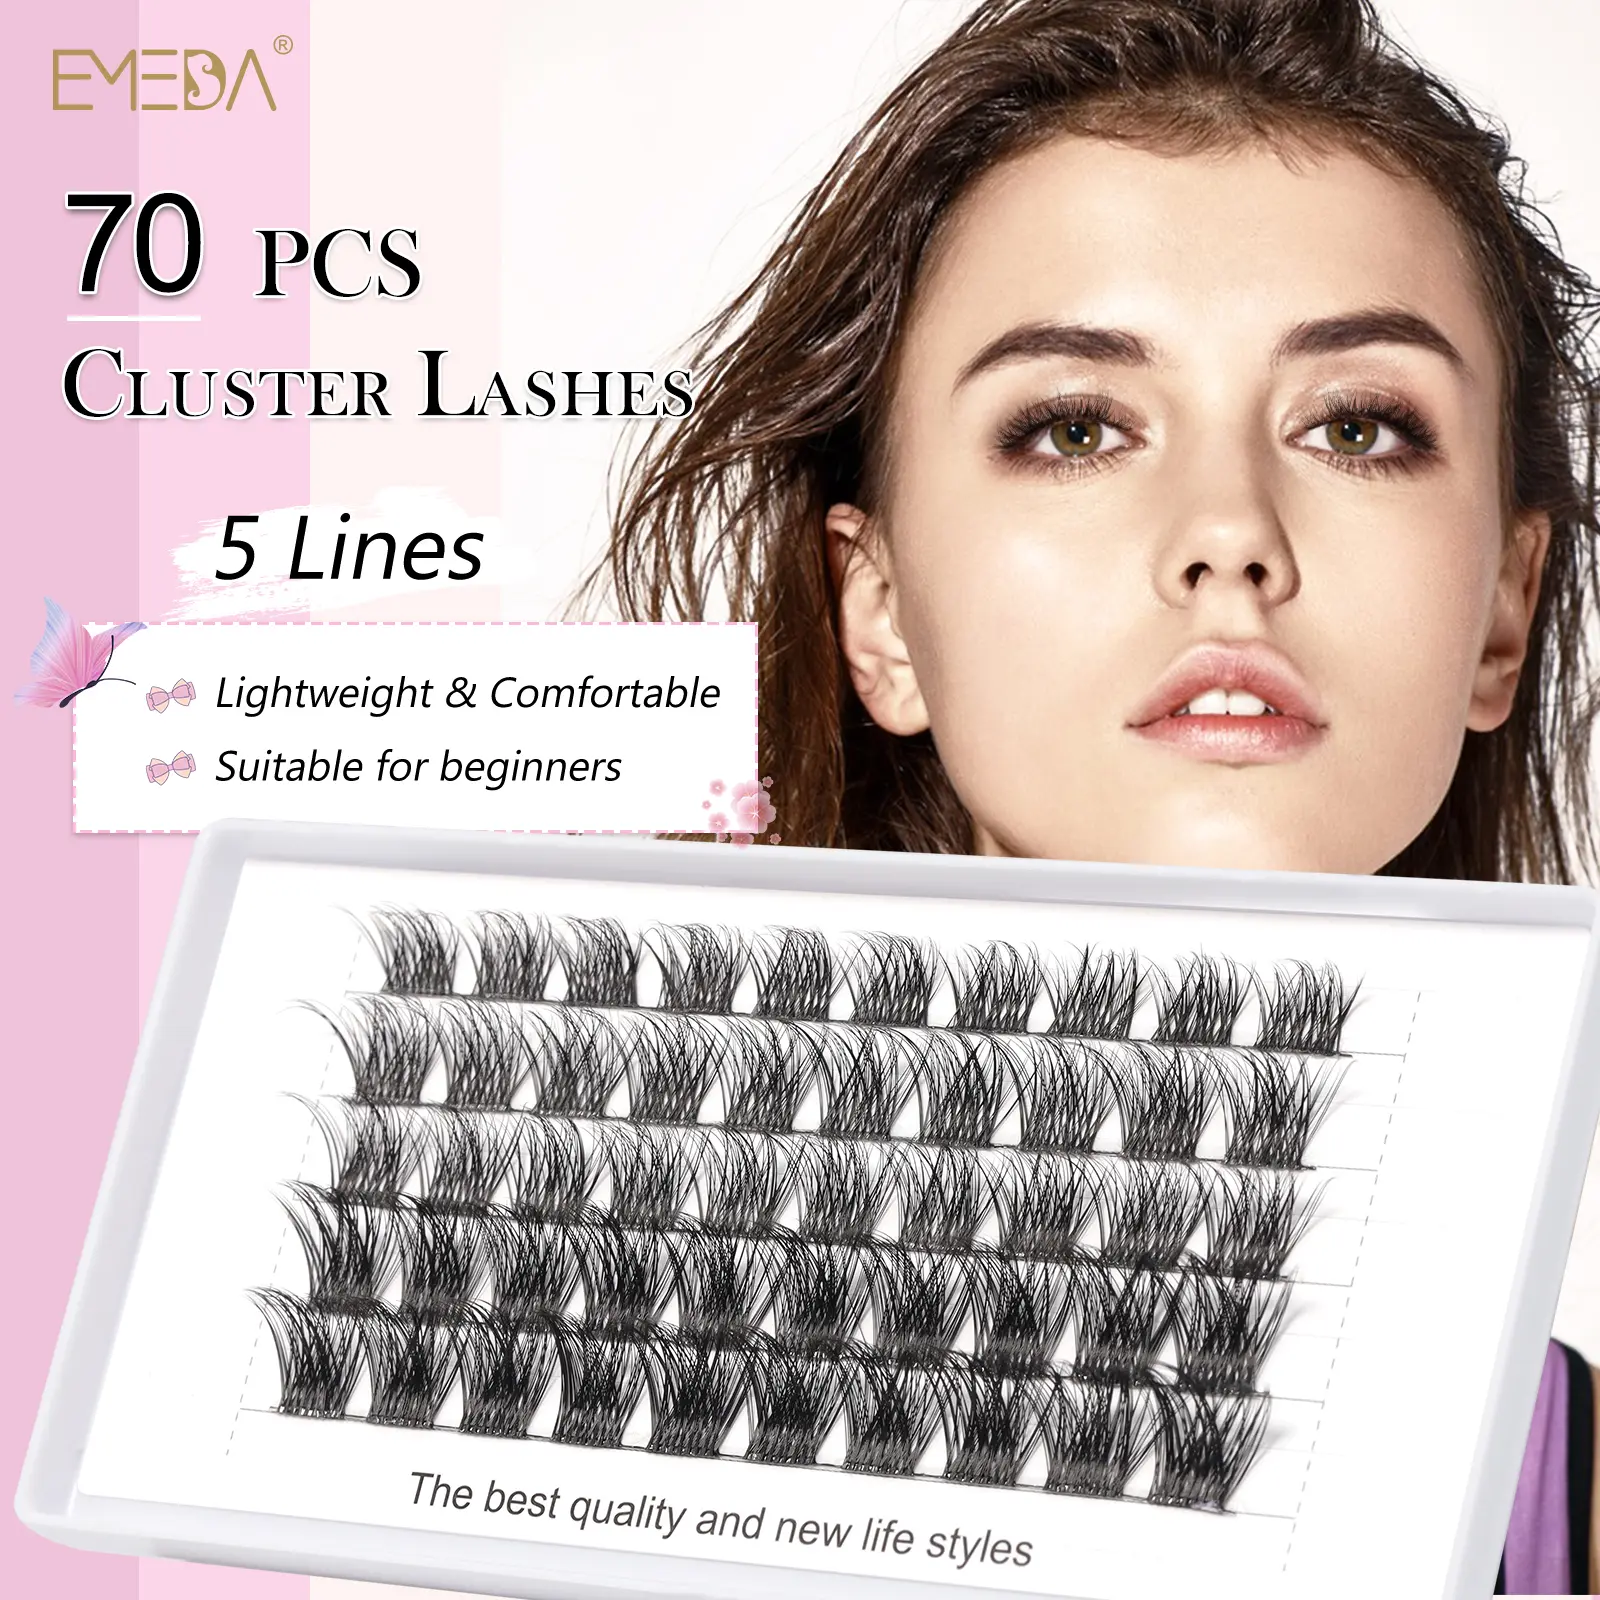 DIY lash extension  Easy at home  Make you more beautiful  High quality  Wholesale price